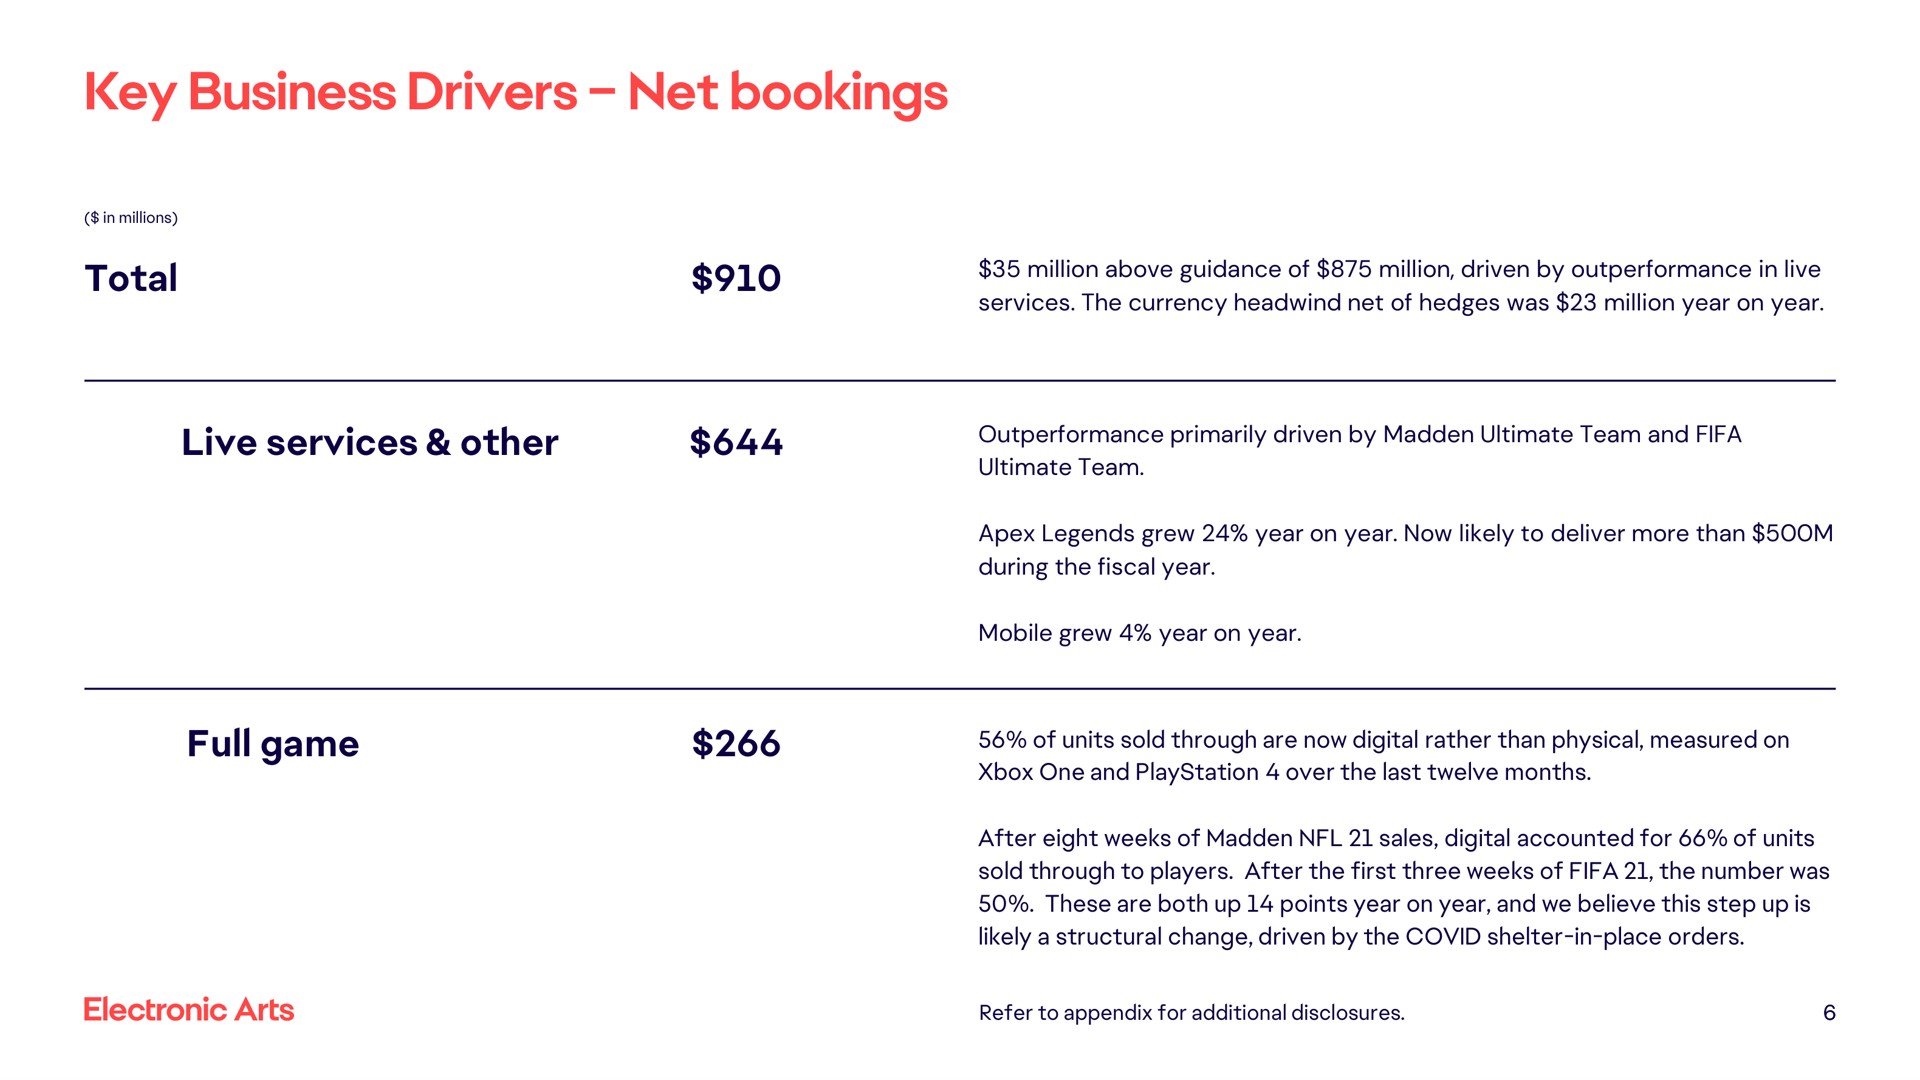 key business drivers net bookings full game | Electronic Arts